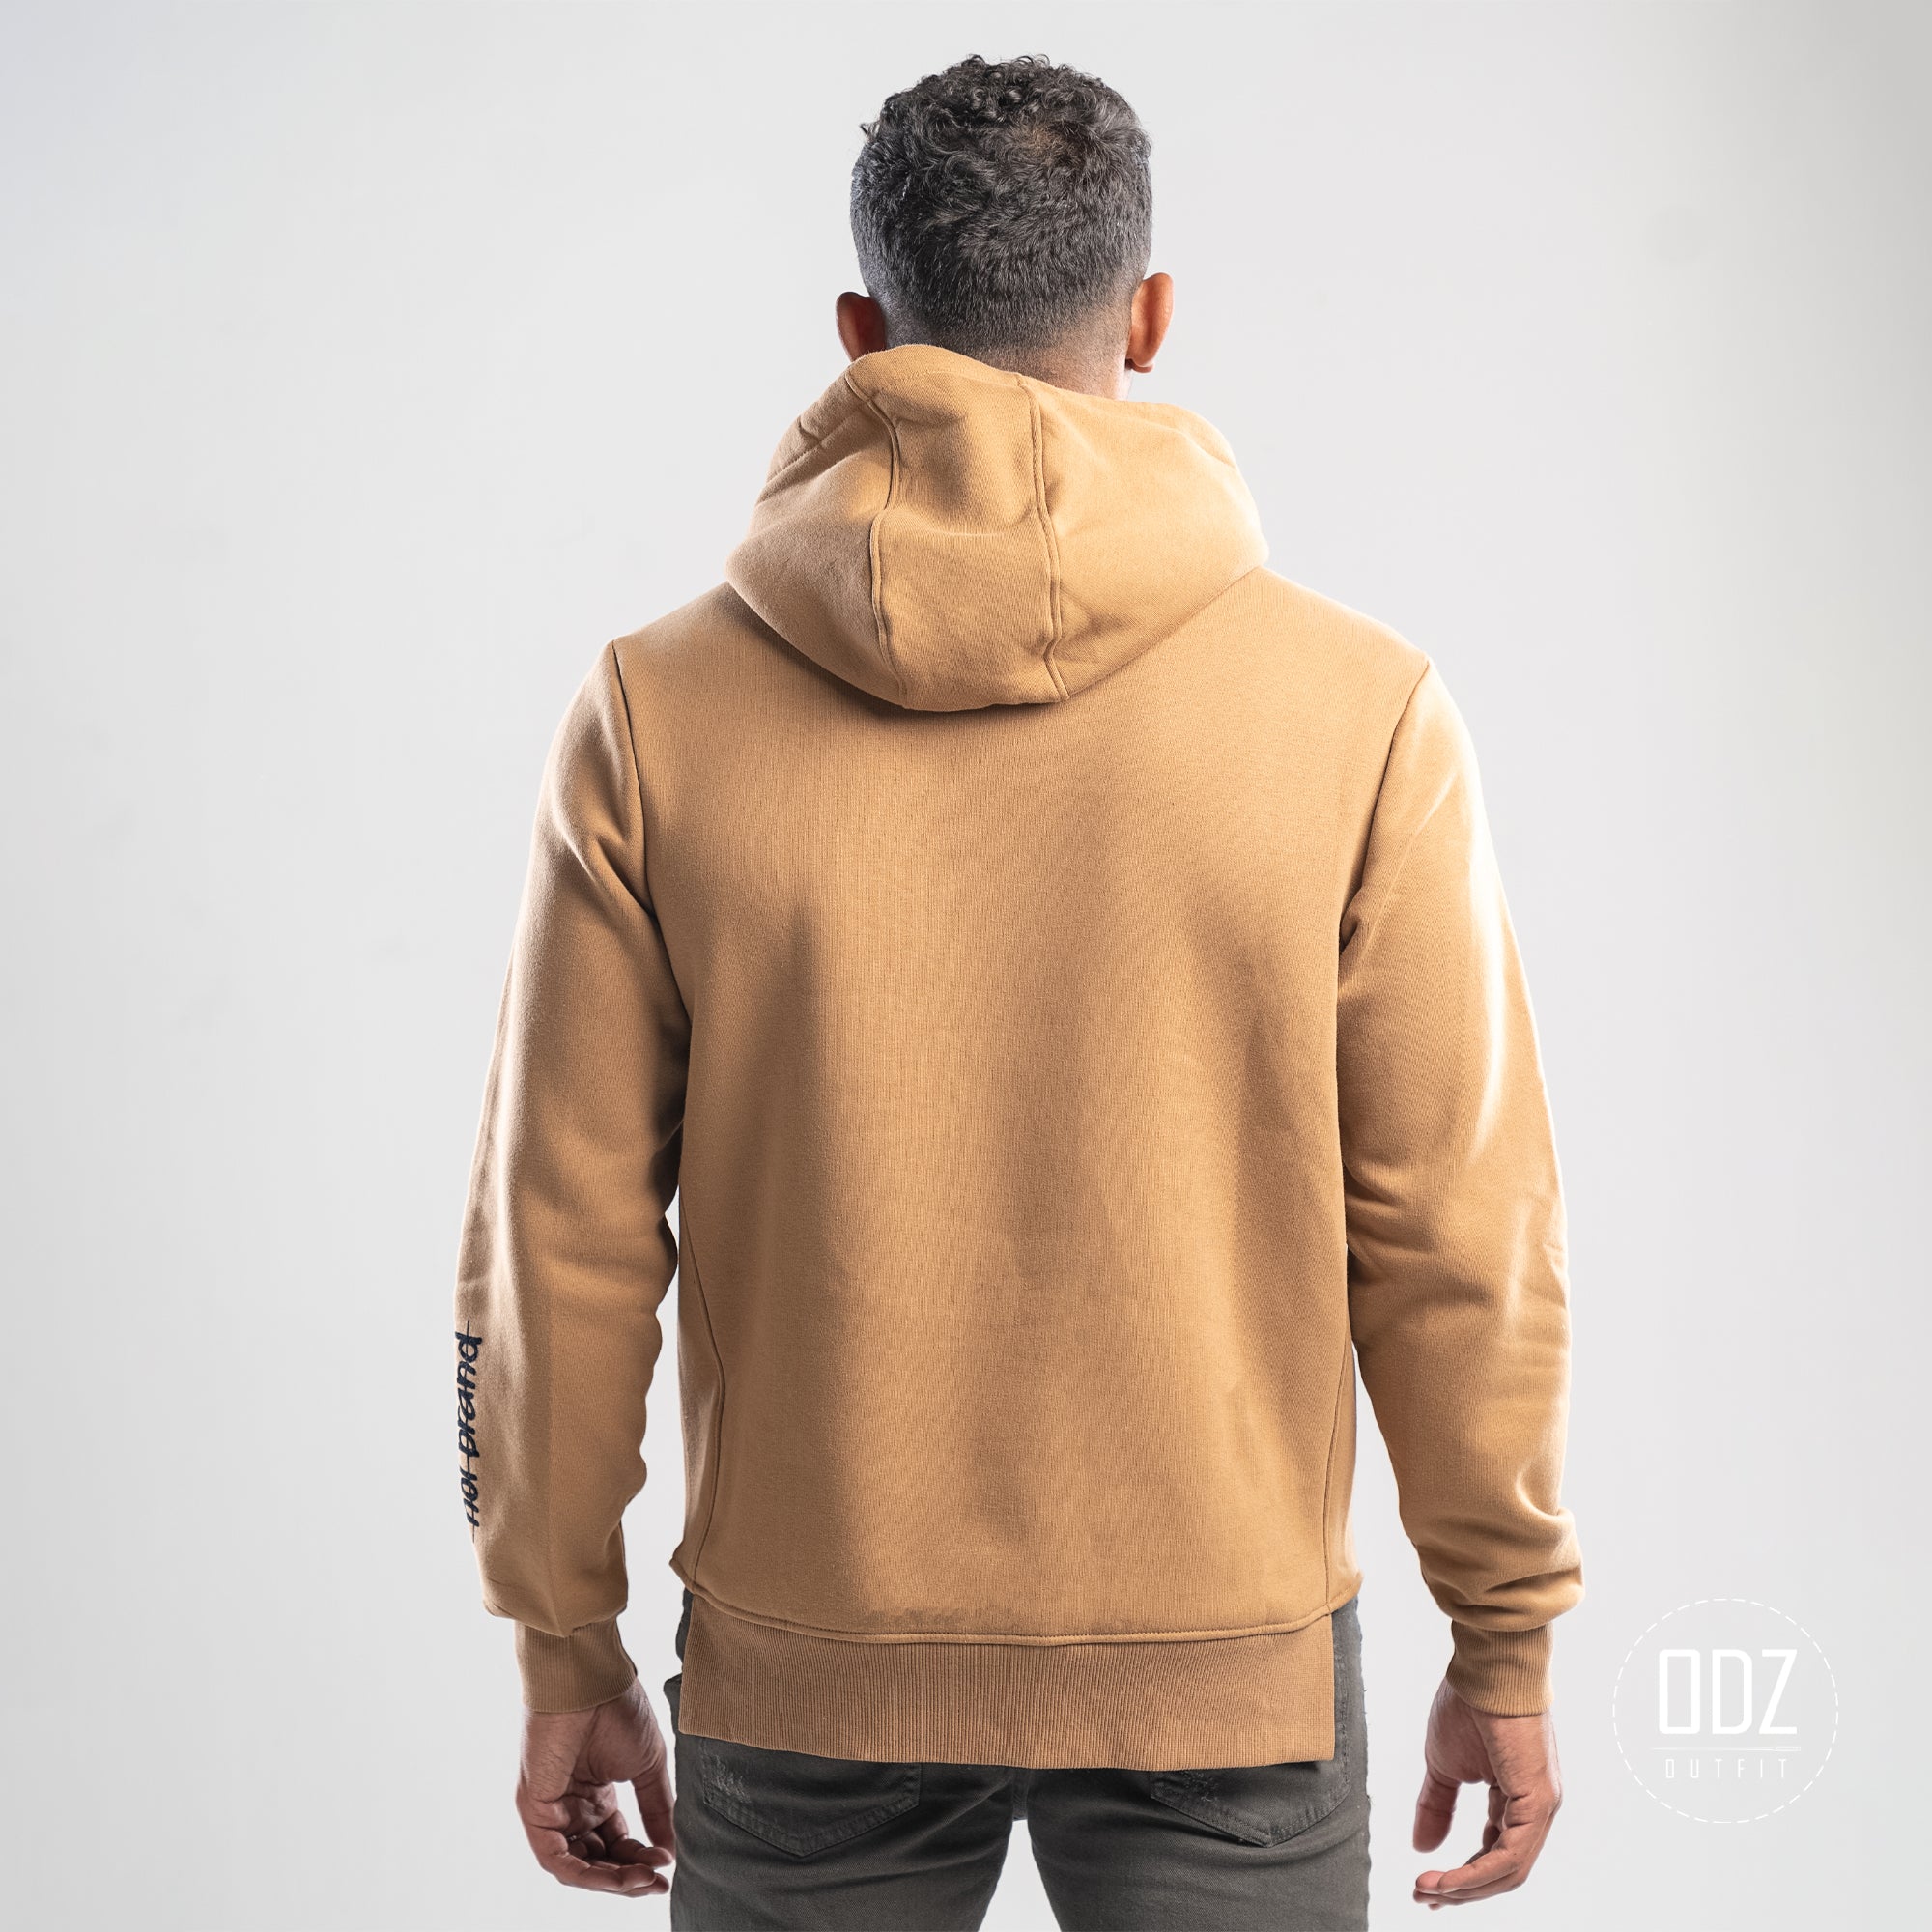 Carmel Cropped Sides Astro. King Hoodie